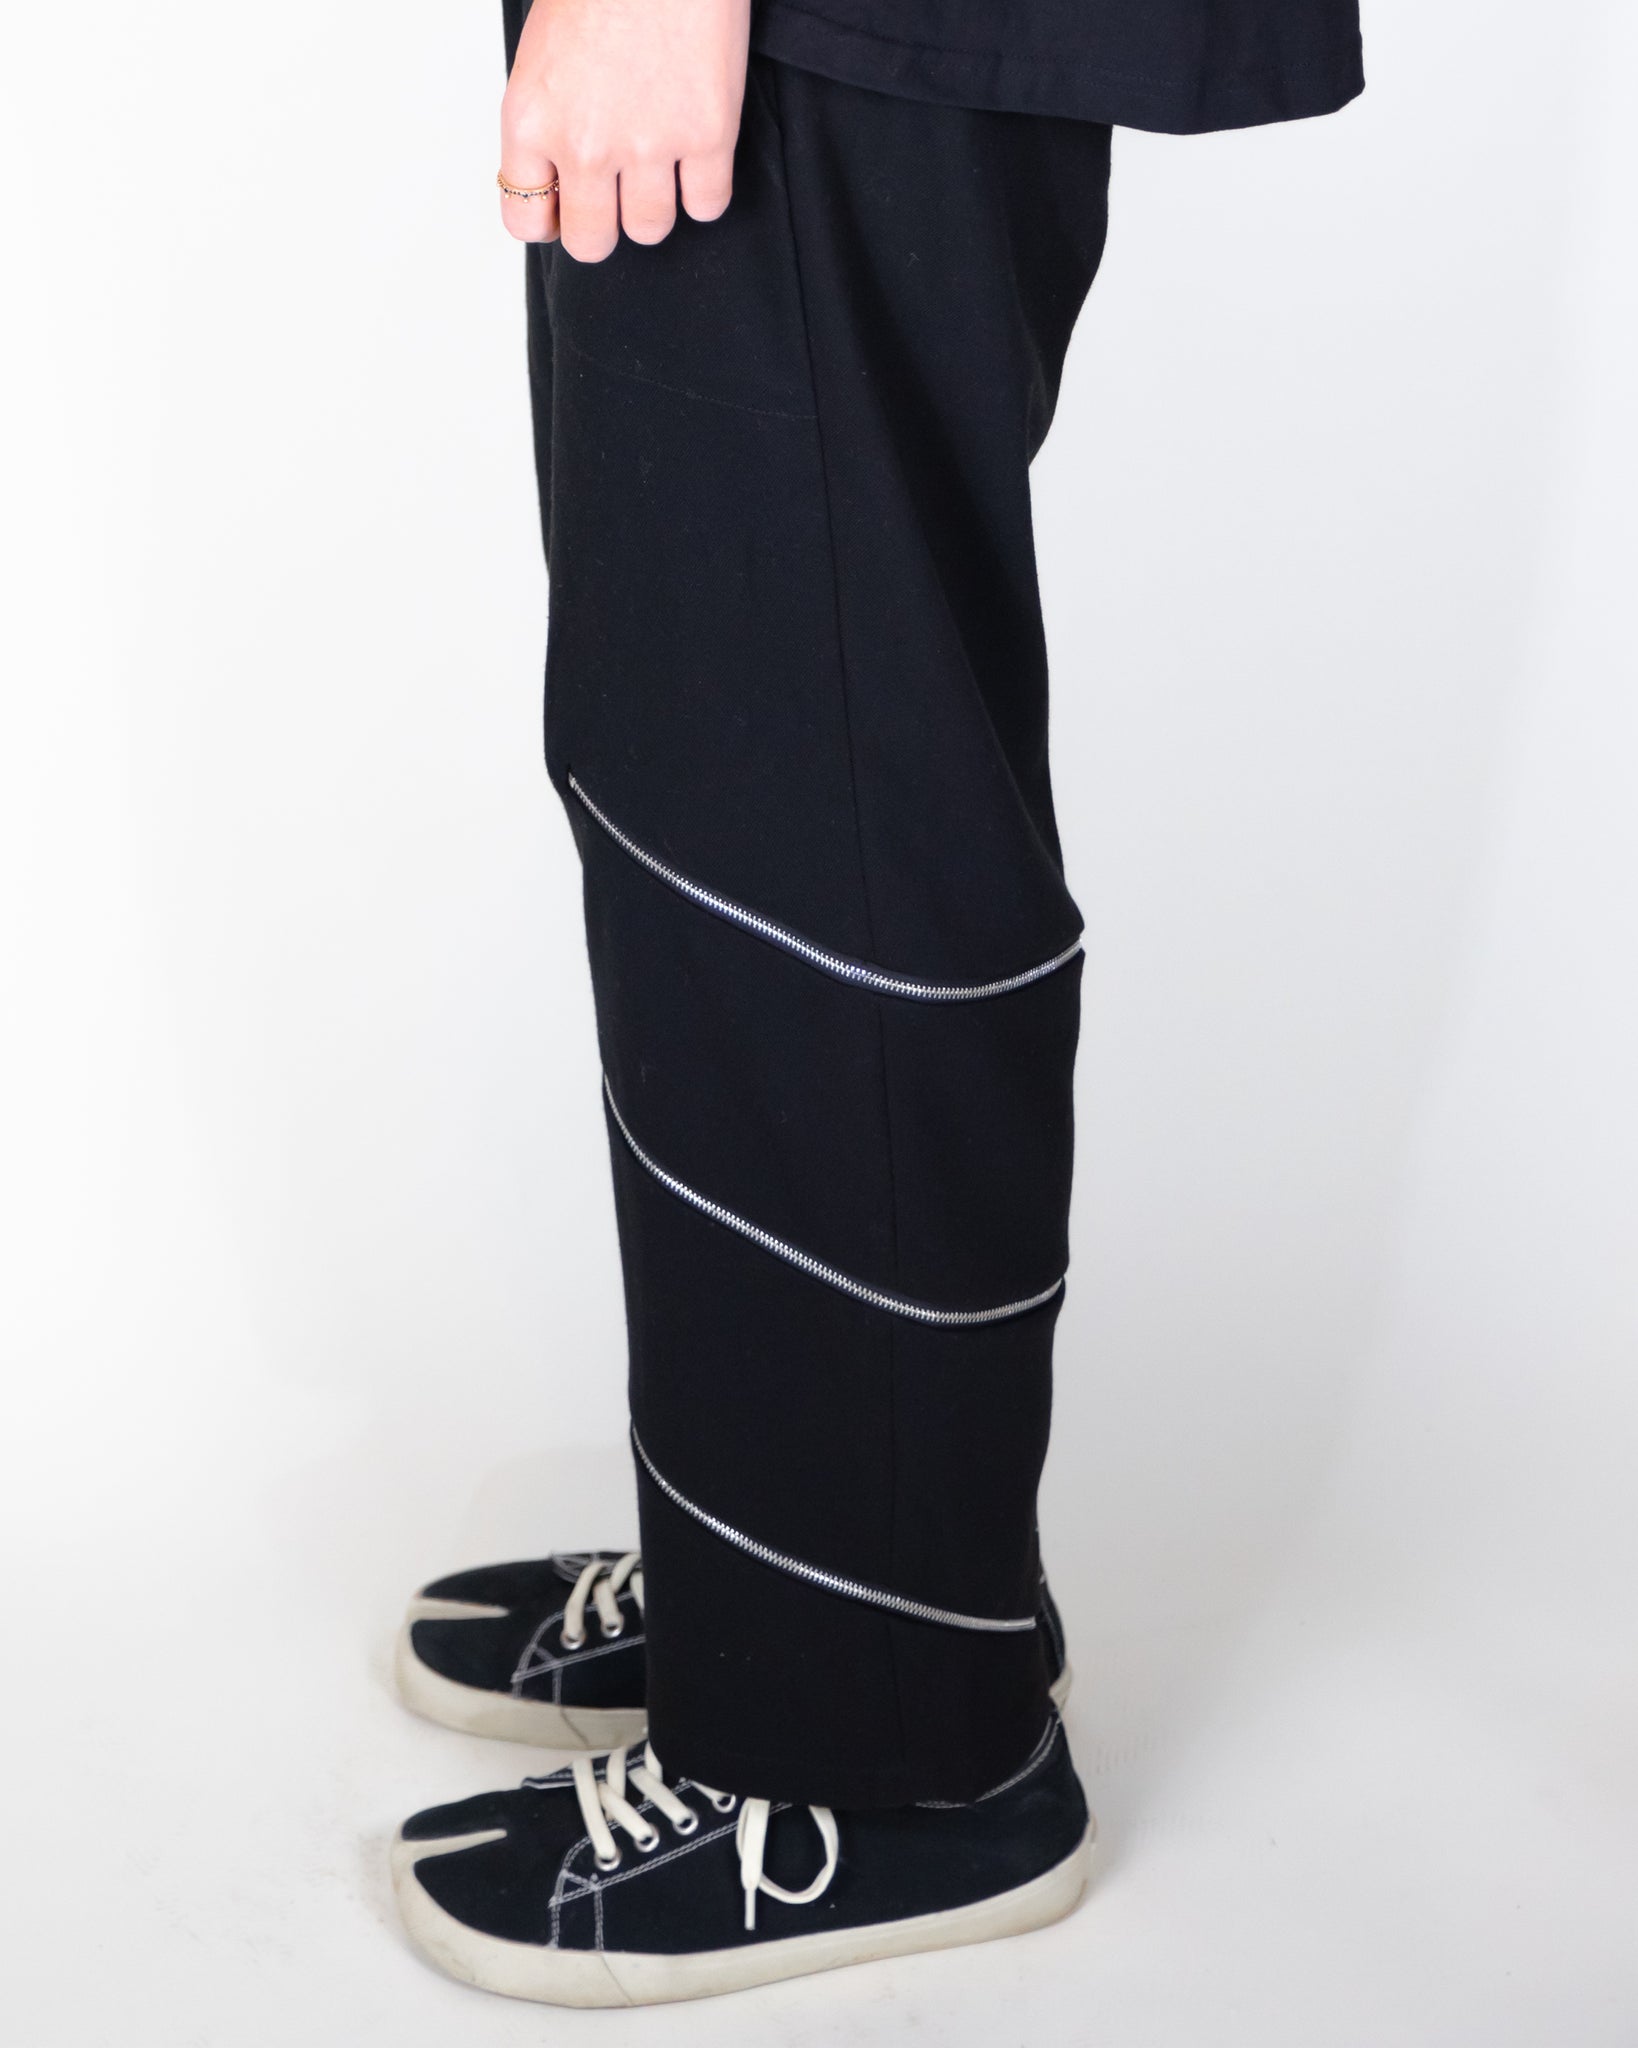 Unnecessary Zipper High Waisted Cropped Trousers